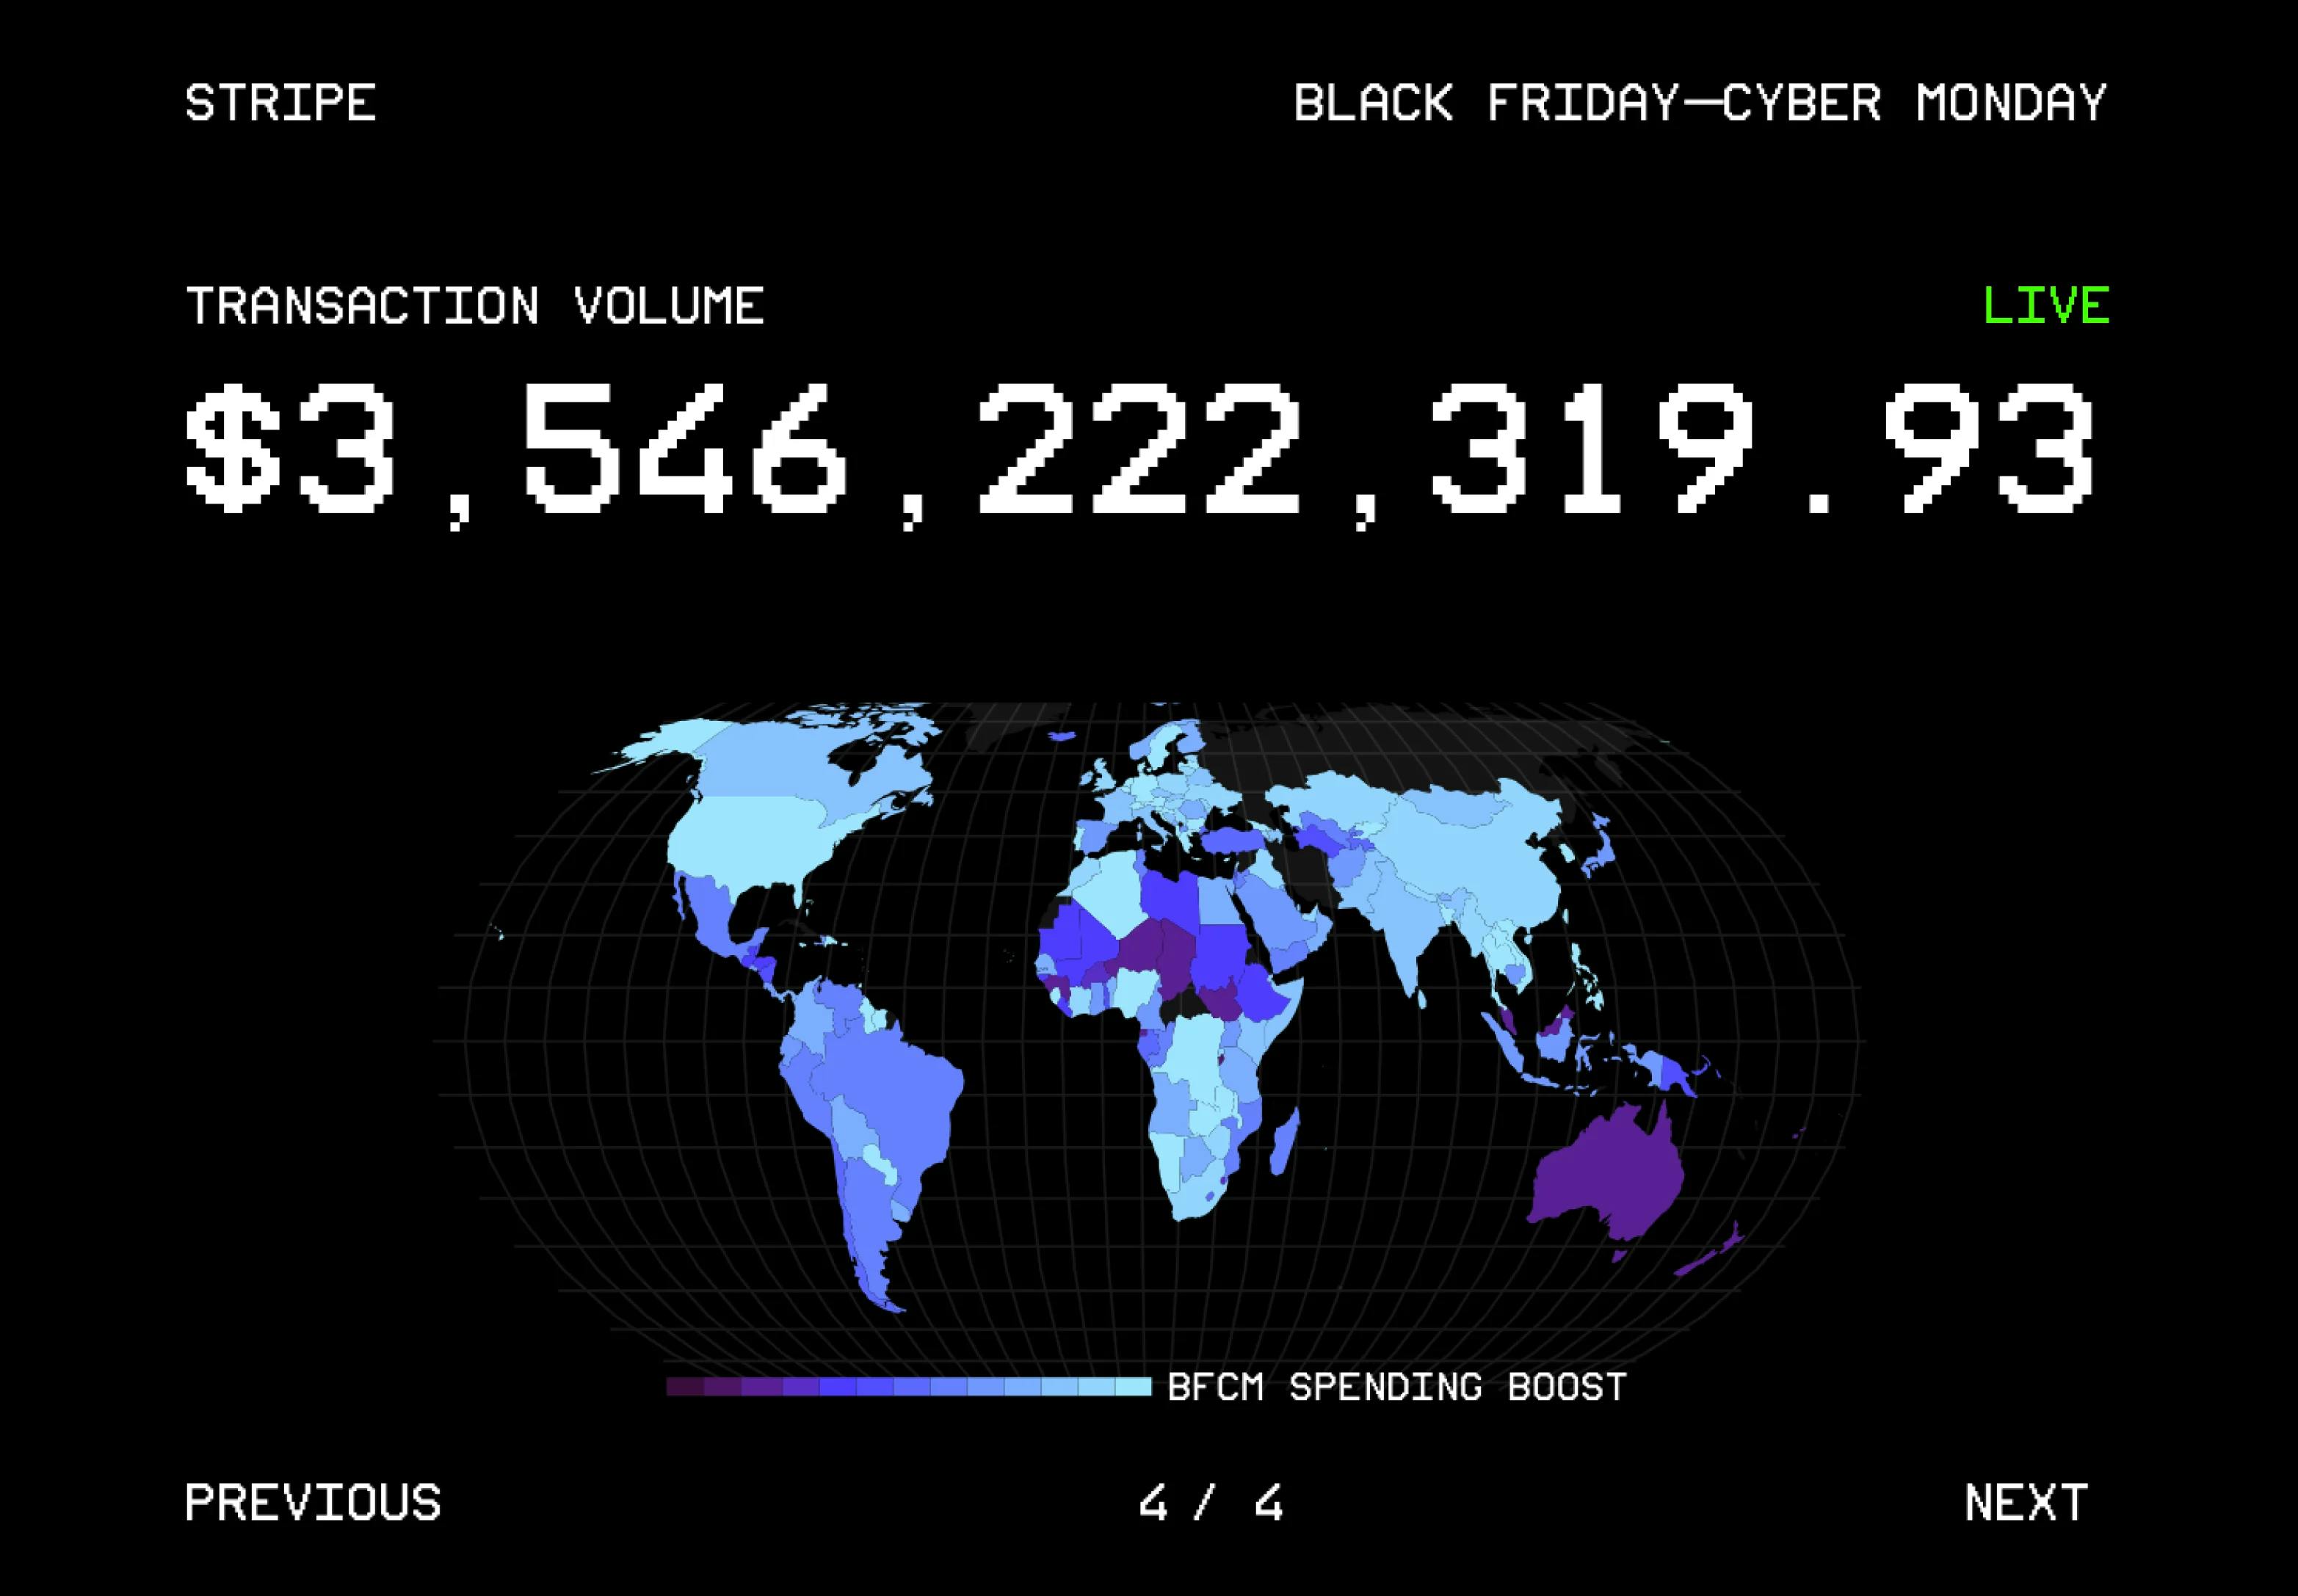 Screenshot of part of Stripe's microsite, taken on Black Friday GMT afternoon.